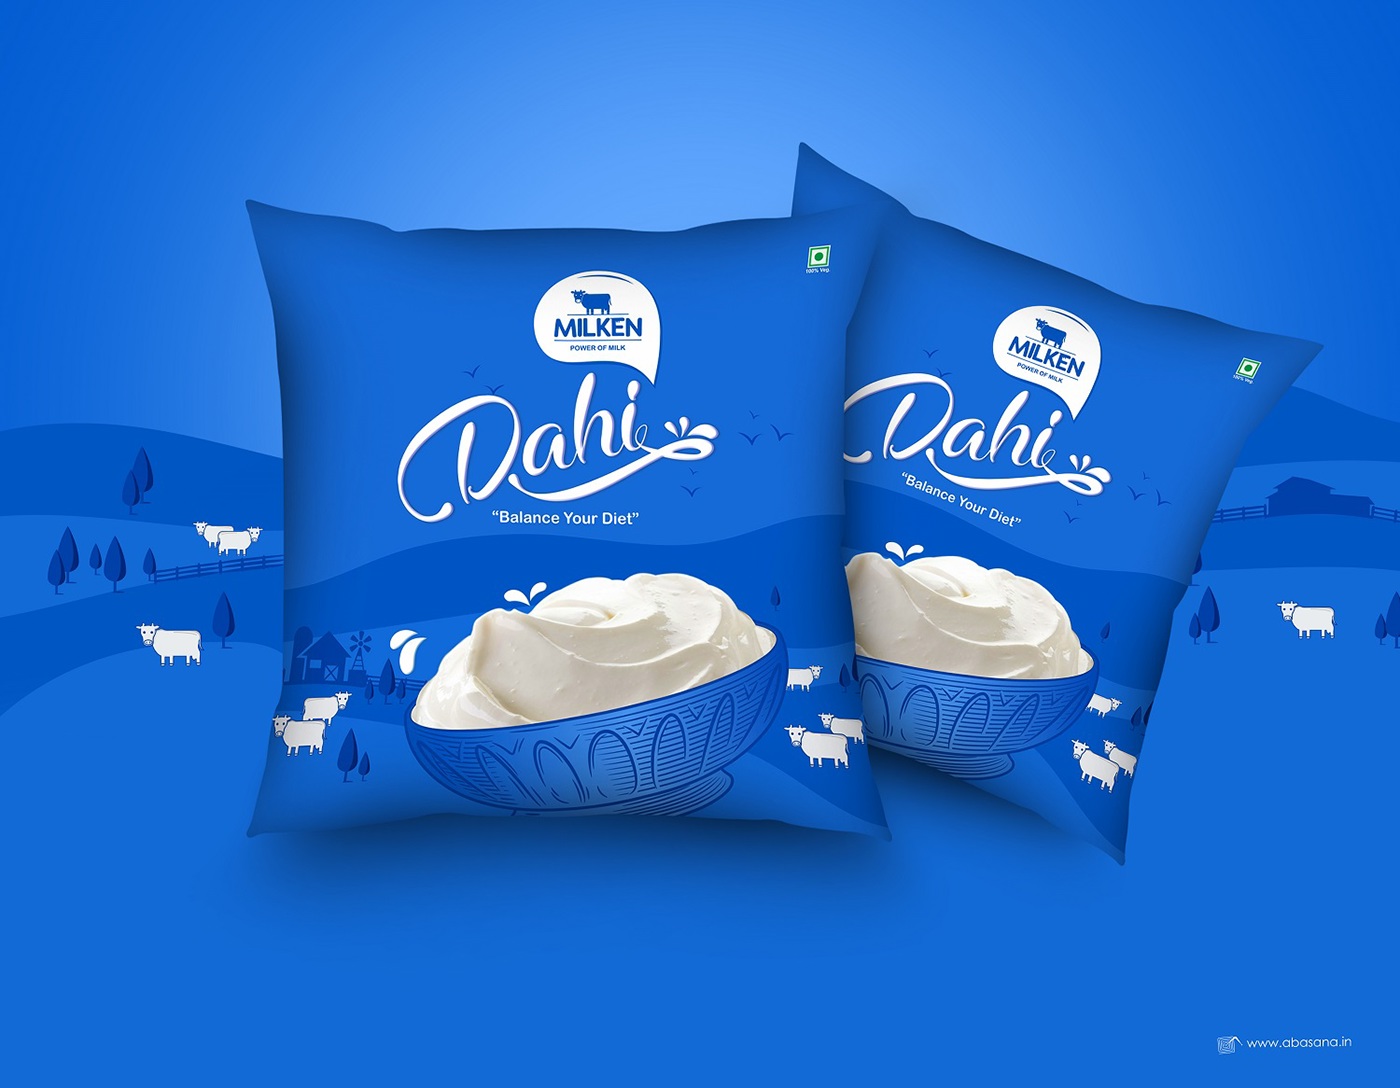 dahi Packaging dairy products milk products curd dairy and foods ahmedabad gujarat Abasana Advertising ad agency